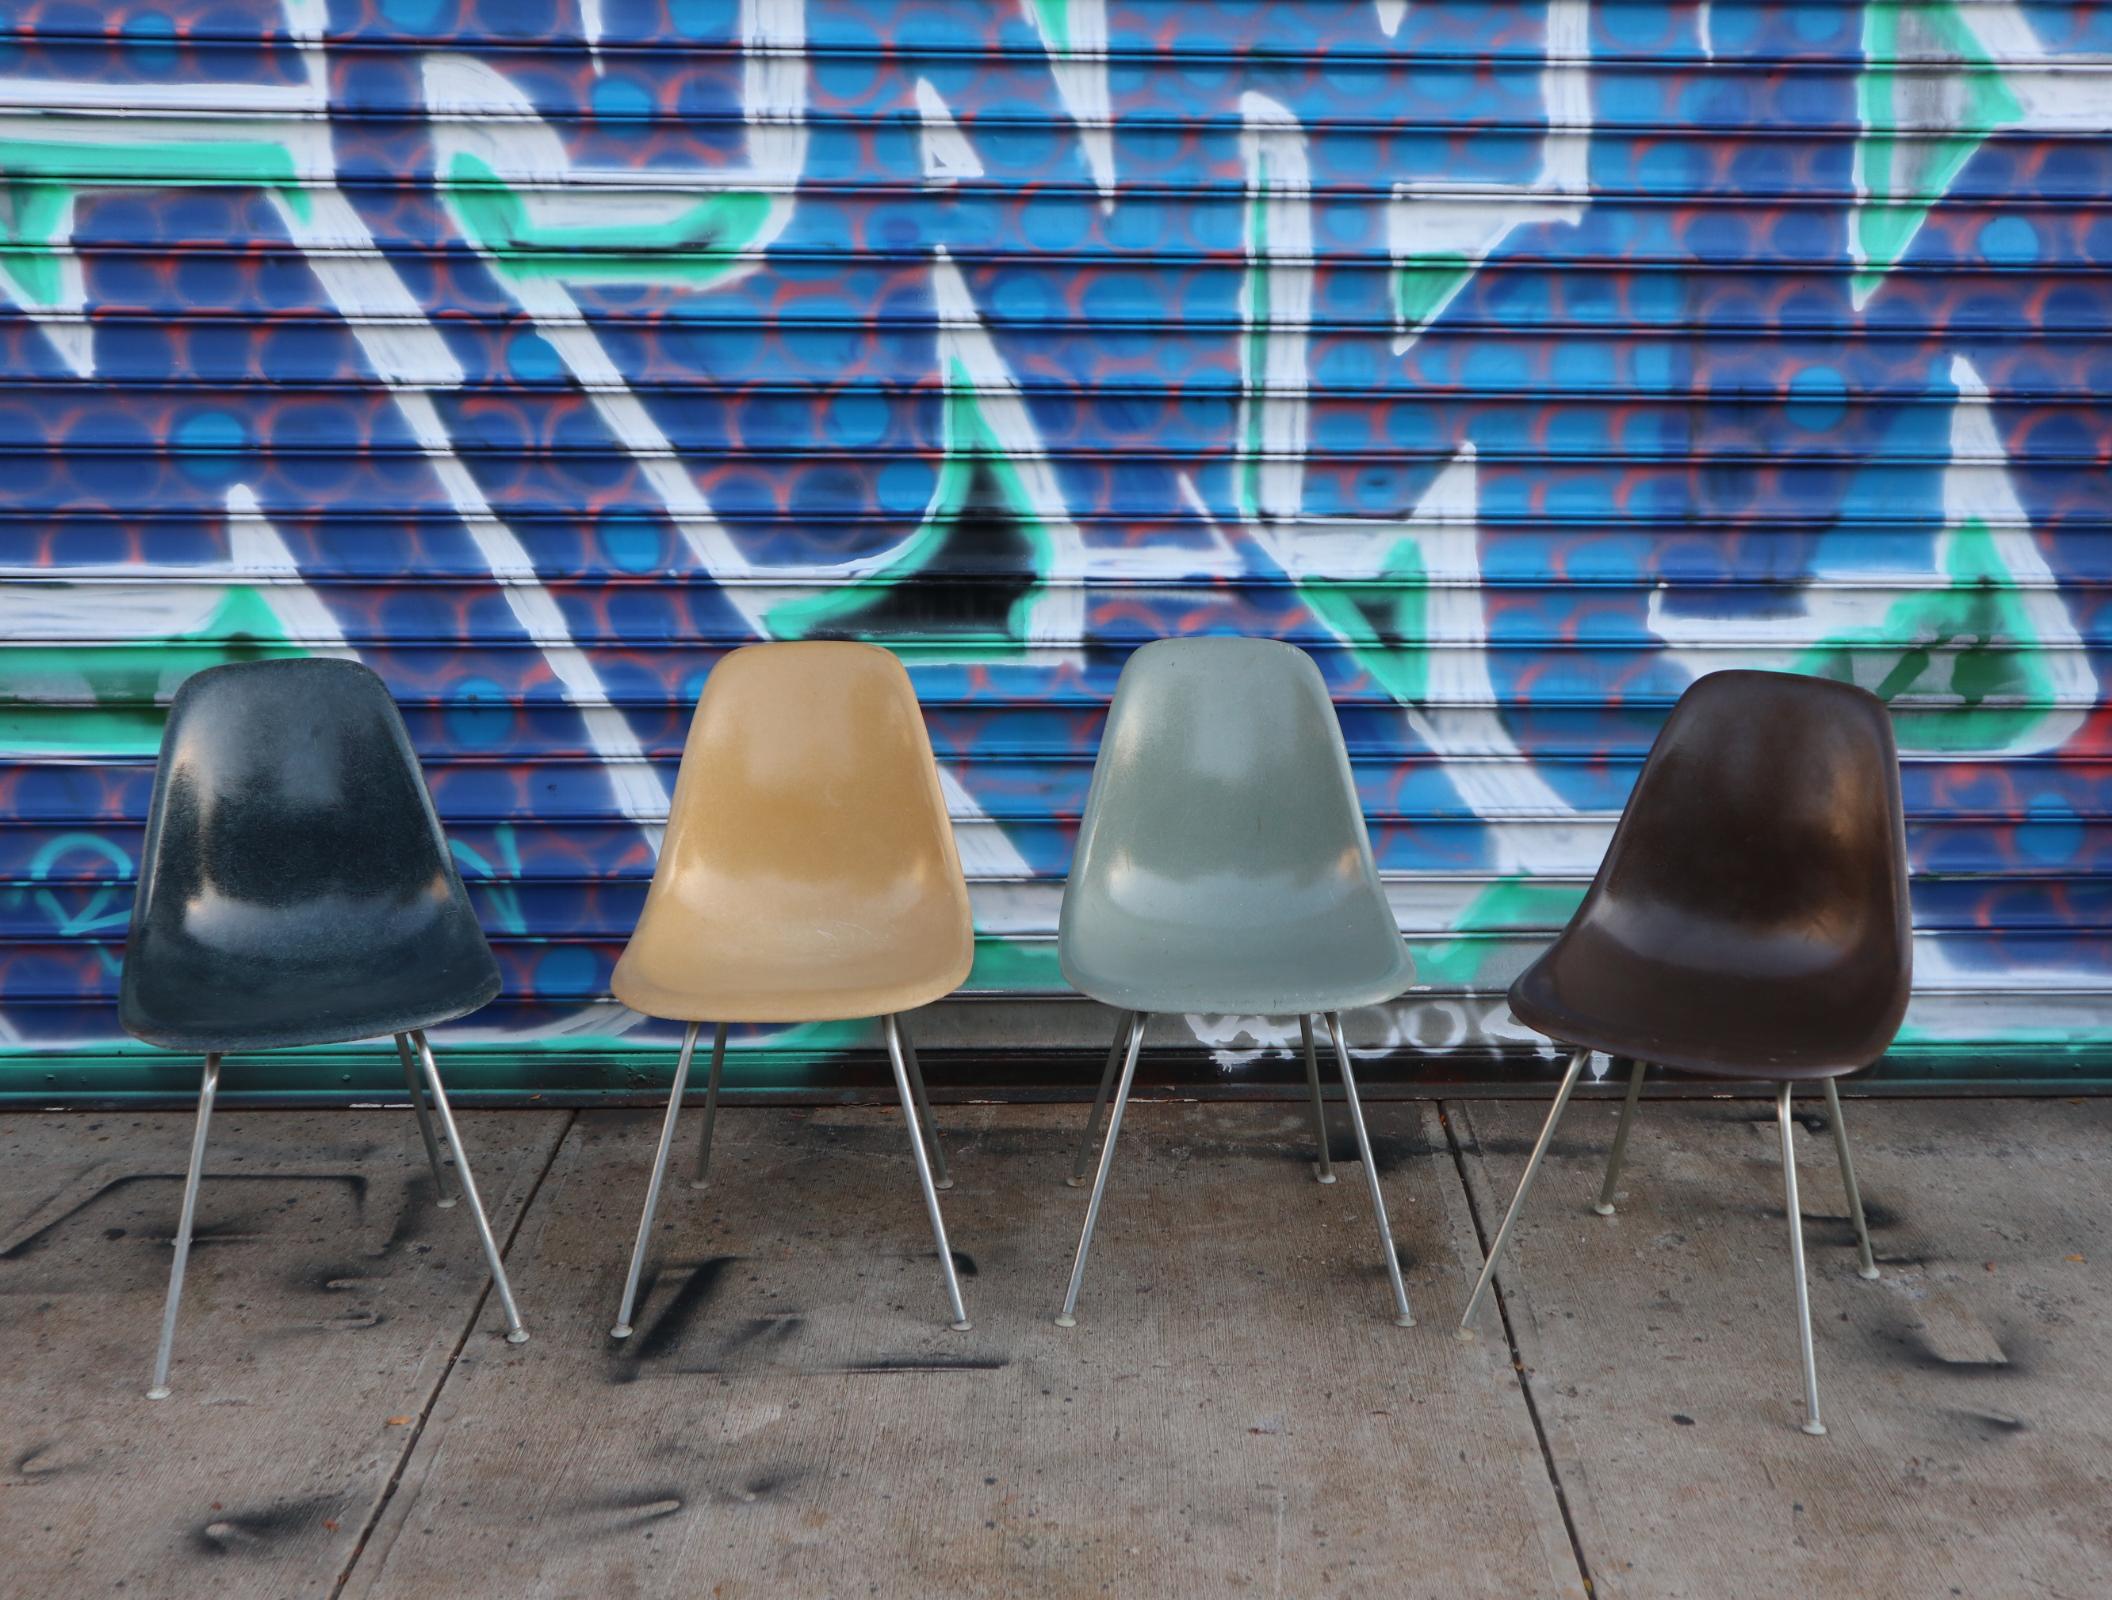 Gorgeous set of 4 Herman Miller Eames fiberglass vintage dining chairs. All in great shape with norm ela vintage wear but no cracks or holes. All shock mounts and glides intact. Authentic vintage Herman Miller steel tube H bases. Colors include